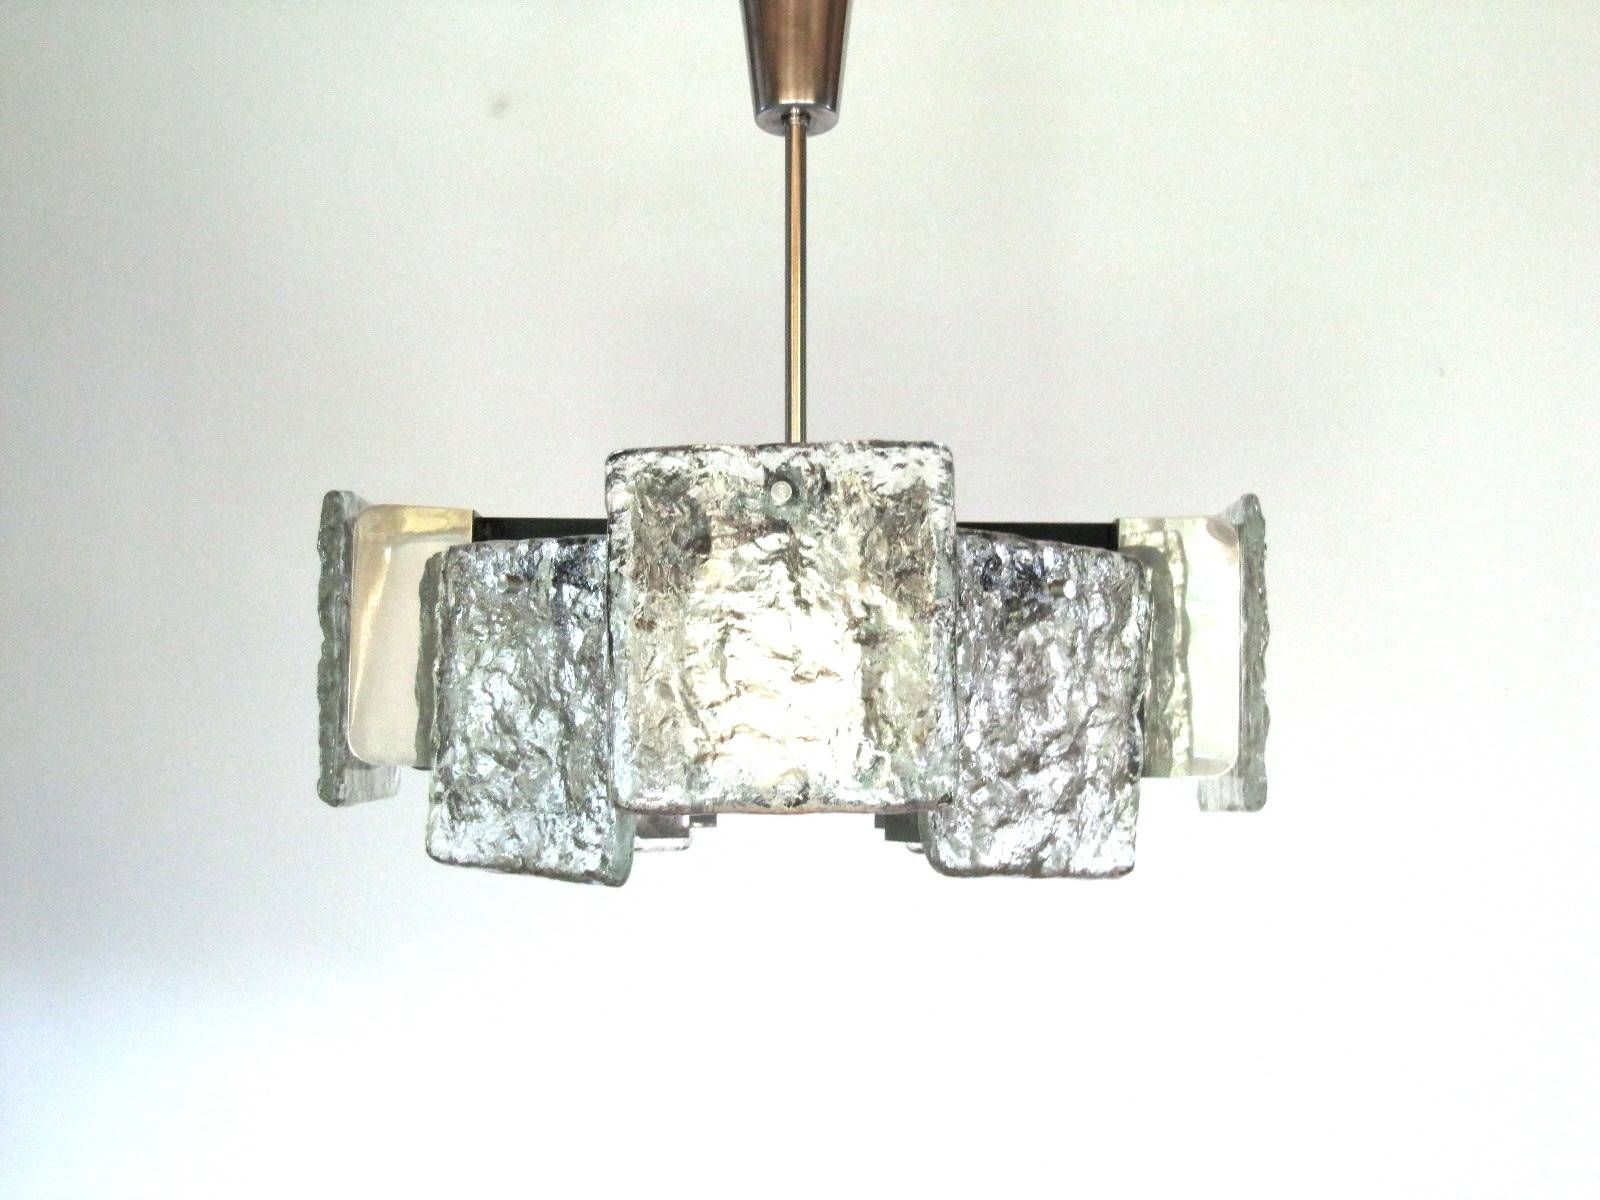 Austrian Murano Glass Ceiling Light From Kalmar, 1960s For Sale At Pertaining To Murano Glass Ceiling Lights (View 12 of 15)